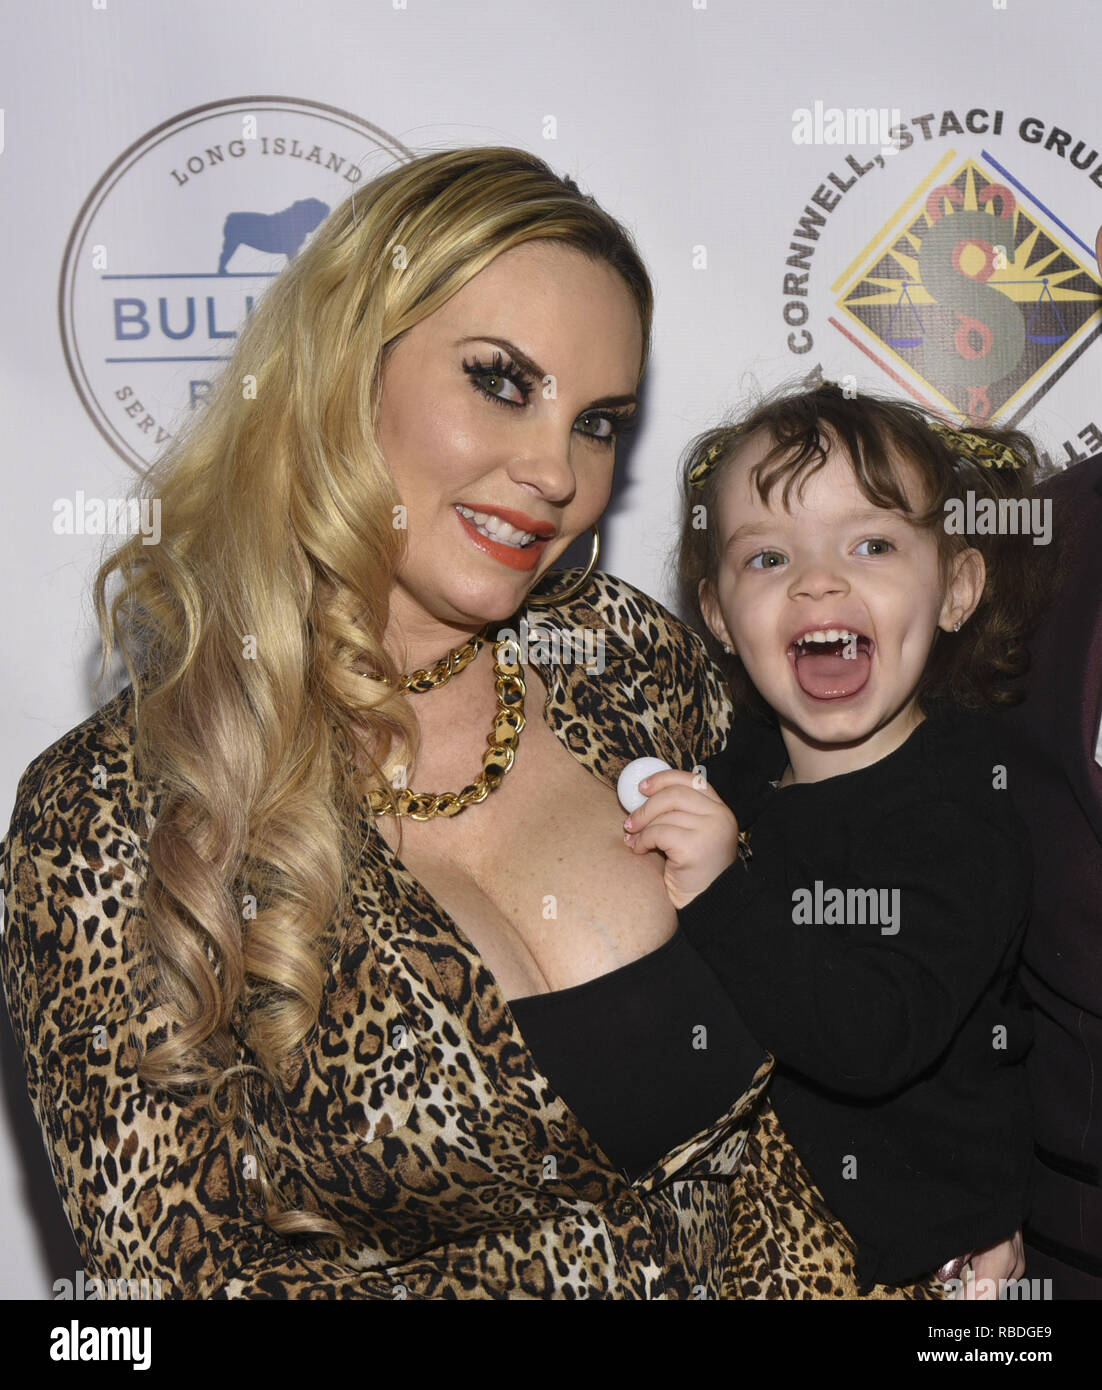 Ice-T's wife Coco Austin and their daughter Chanel attend 'Bash for the Bulldogs' Benefit for Long Island Bulldog Rescue held at Kimmel Center NYU, Rosenthal Pavilion  Featuring: Coco Austin, Chanel Nicole Marrow Where: New York City, New York, United States When: 07 Dec 2018 Credit: Rob Rich/WENN.com Stock Photo